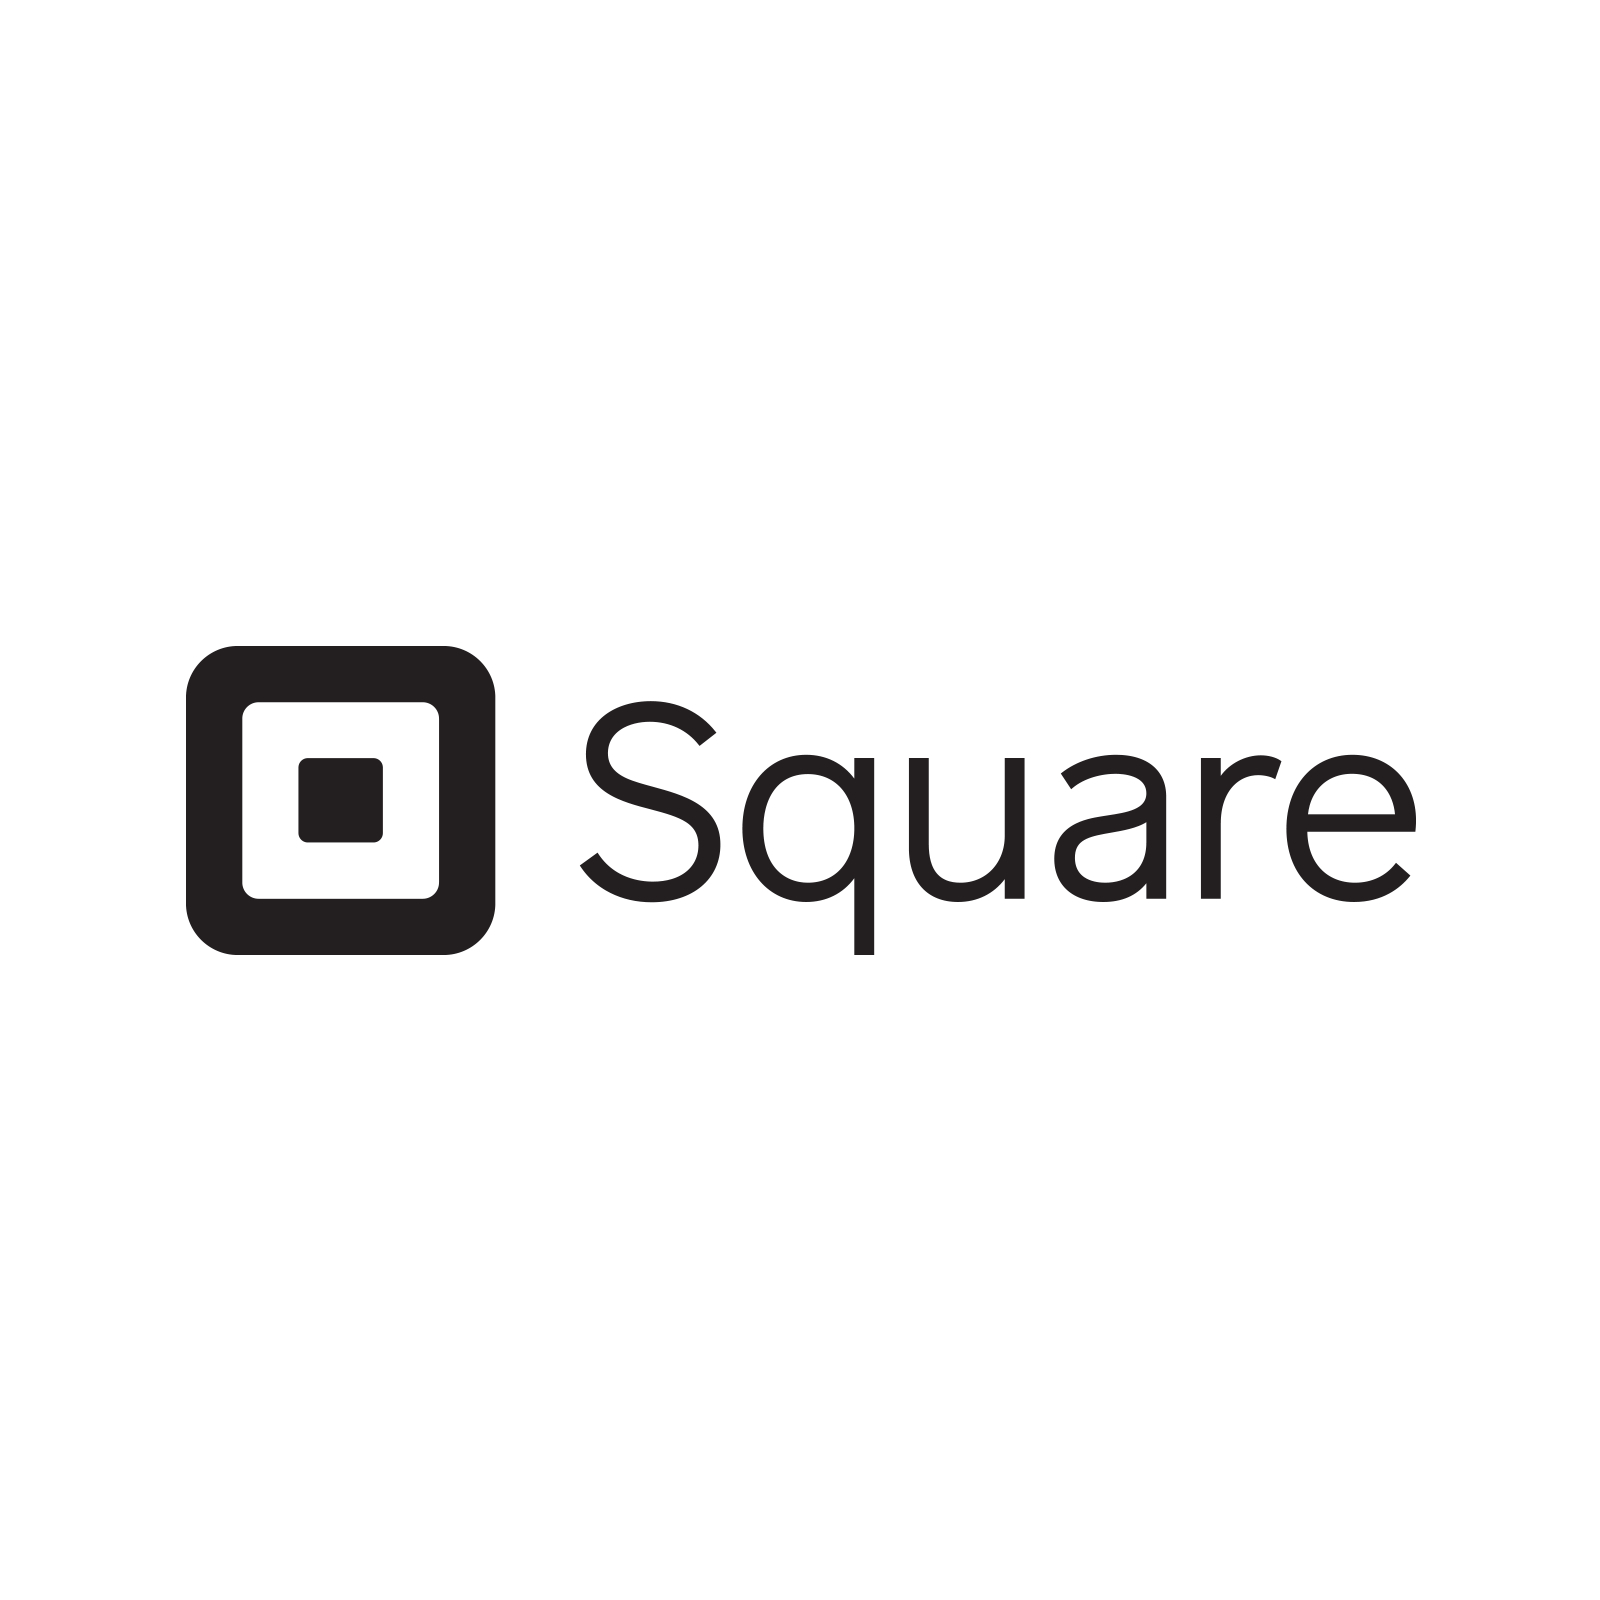 Payment processing with Square.